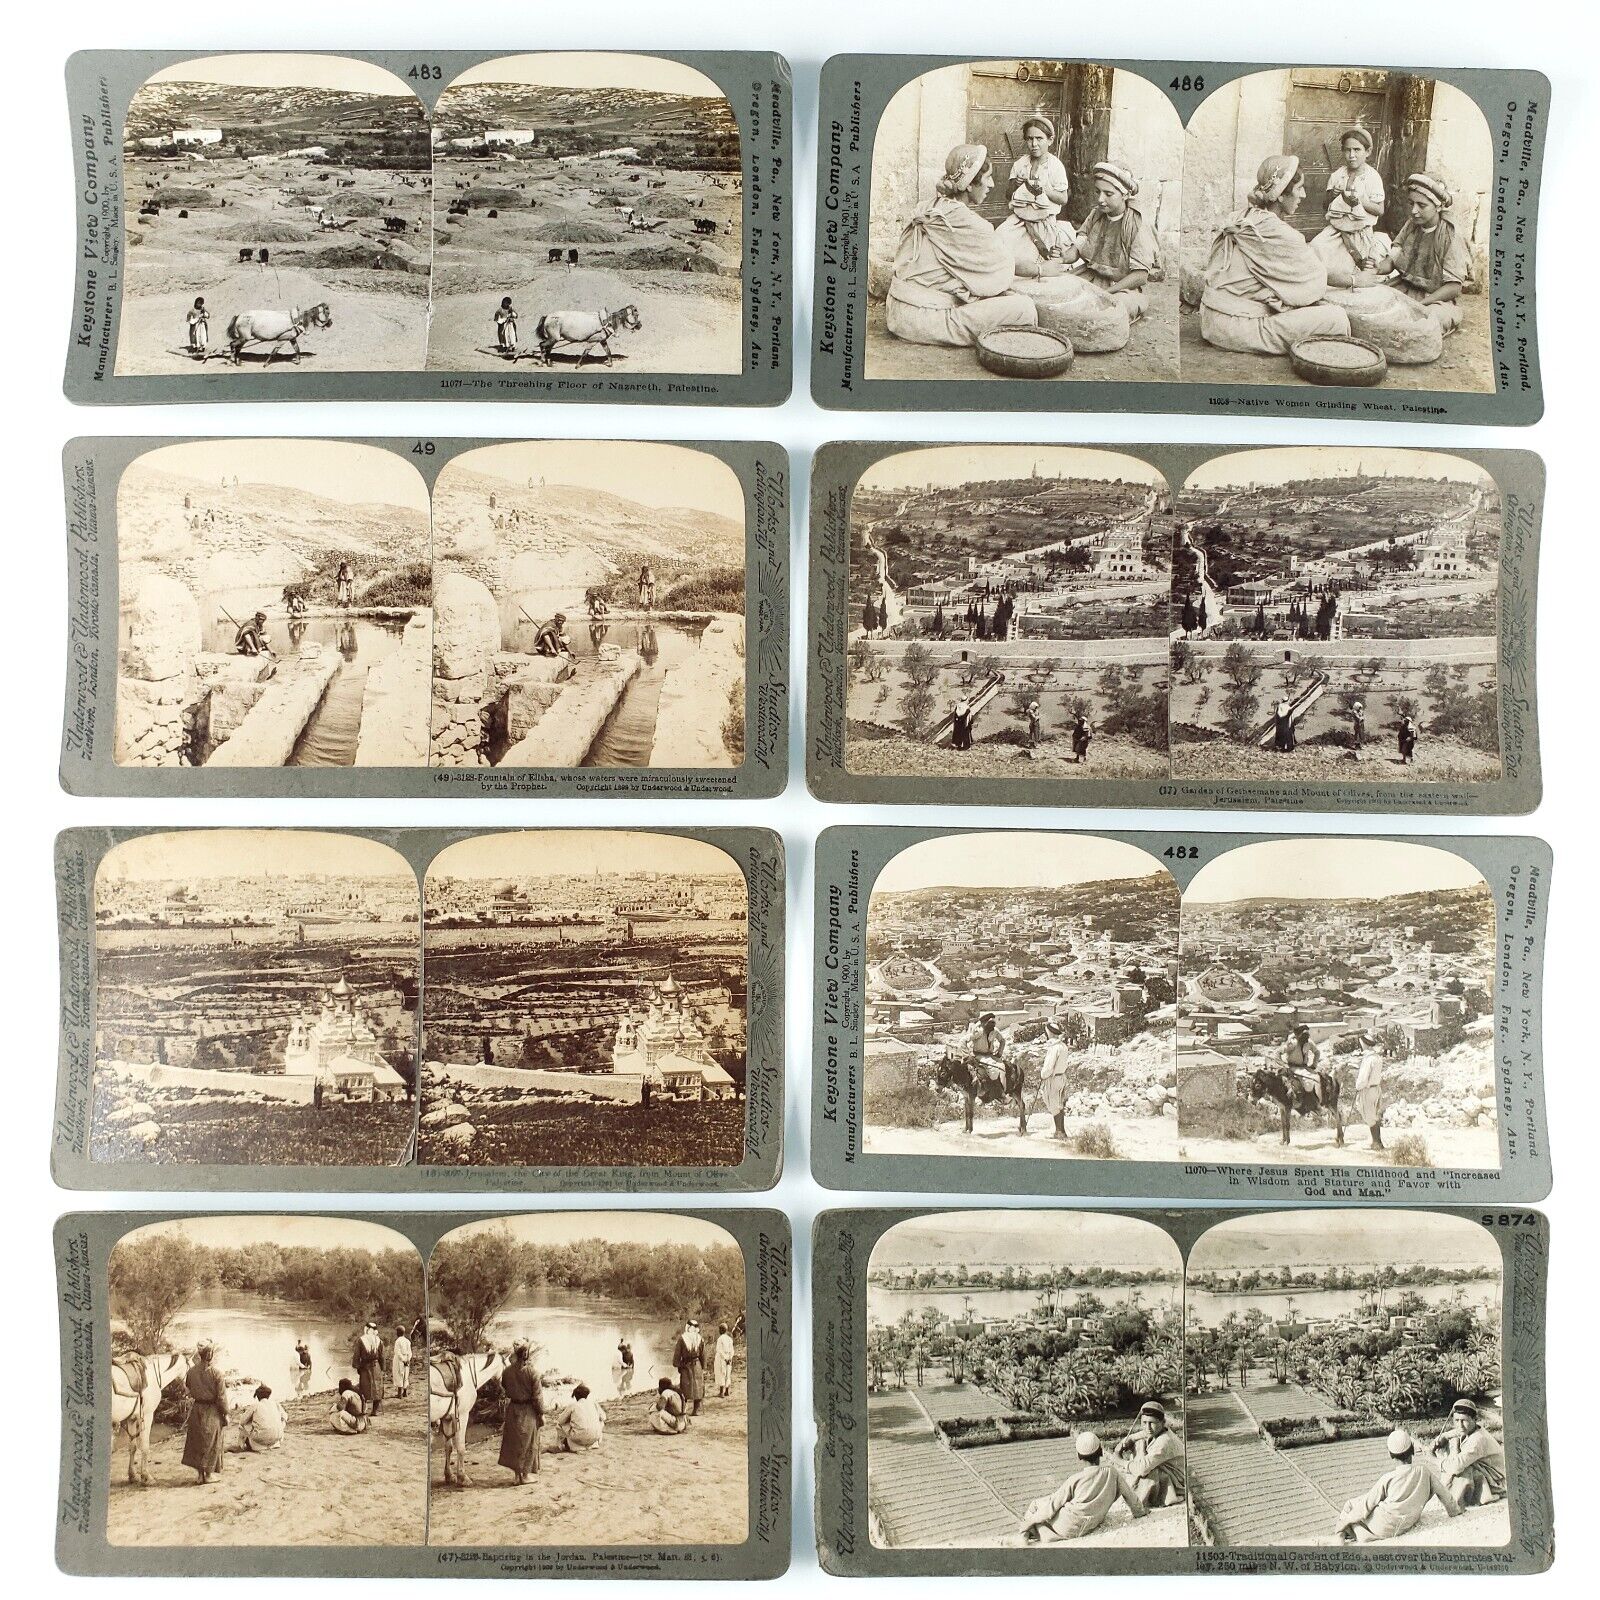 Ancient Palestine Stereoview Lot of 8 Antique Holy Land Israel Photo Set C1750